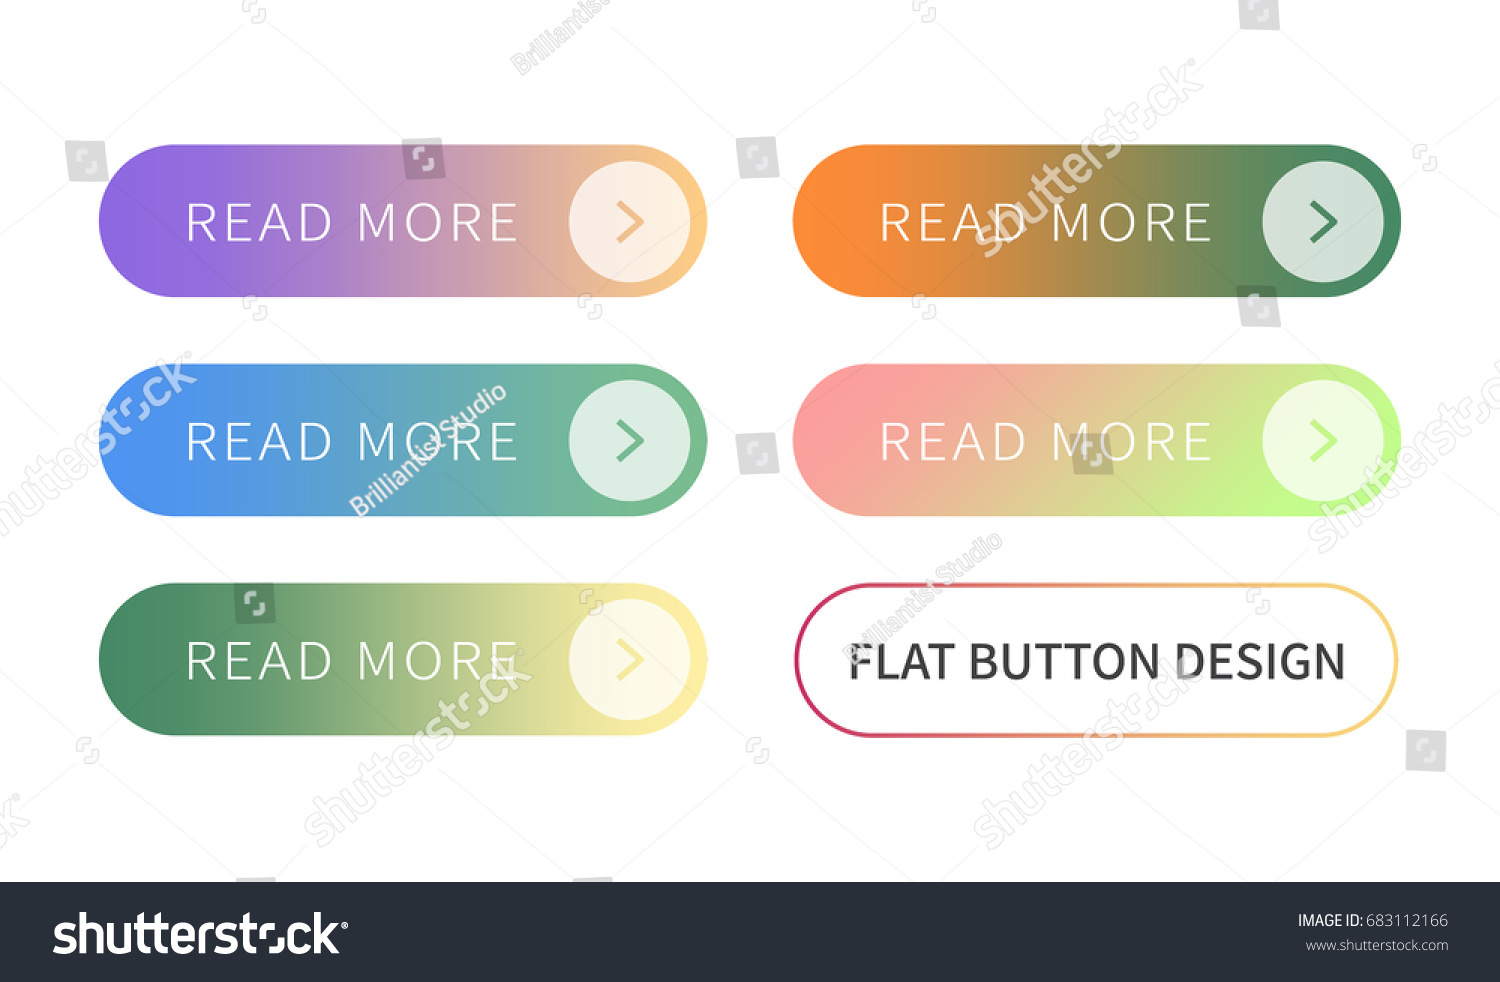 Call to action buttons set flat design ; Read more Button.Vector illustration buttons with colorful gradient or color transition for your brilliant Web button, mobile devices, icons, banner & more. #683112166